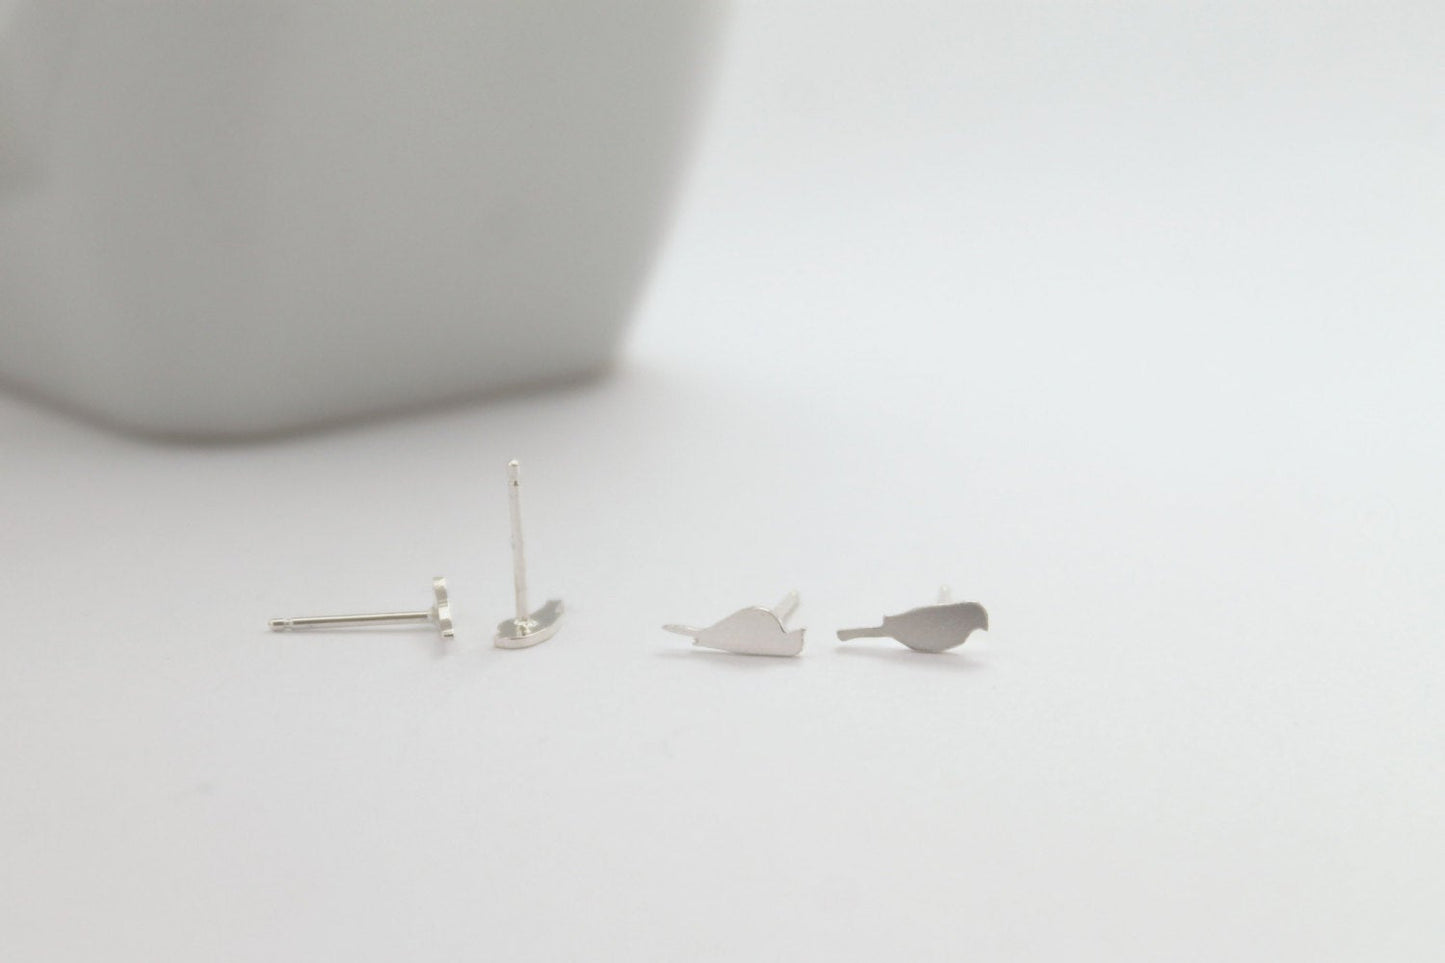 Tiny Bird Studs Set of Four 4 Sterling Silver Bird Earrings, Mismatched Studs, Bird Earrings,Bird Jewelry, Gift for Women, Small Earrings